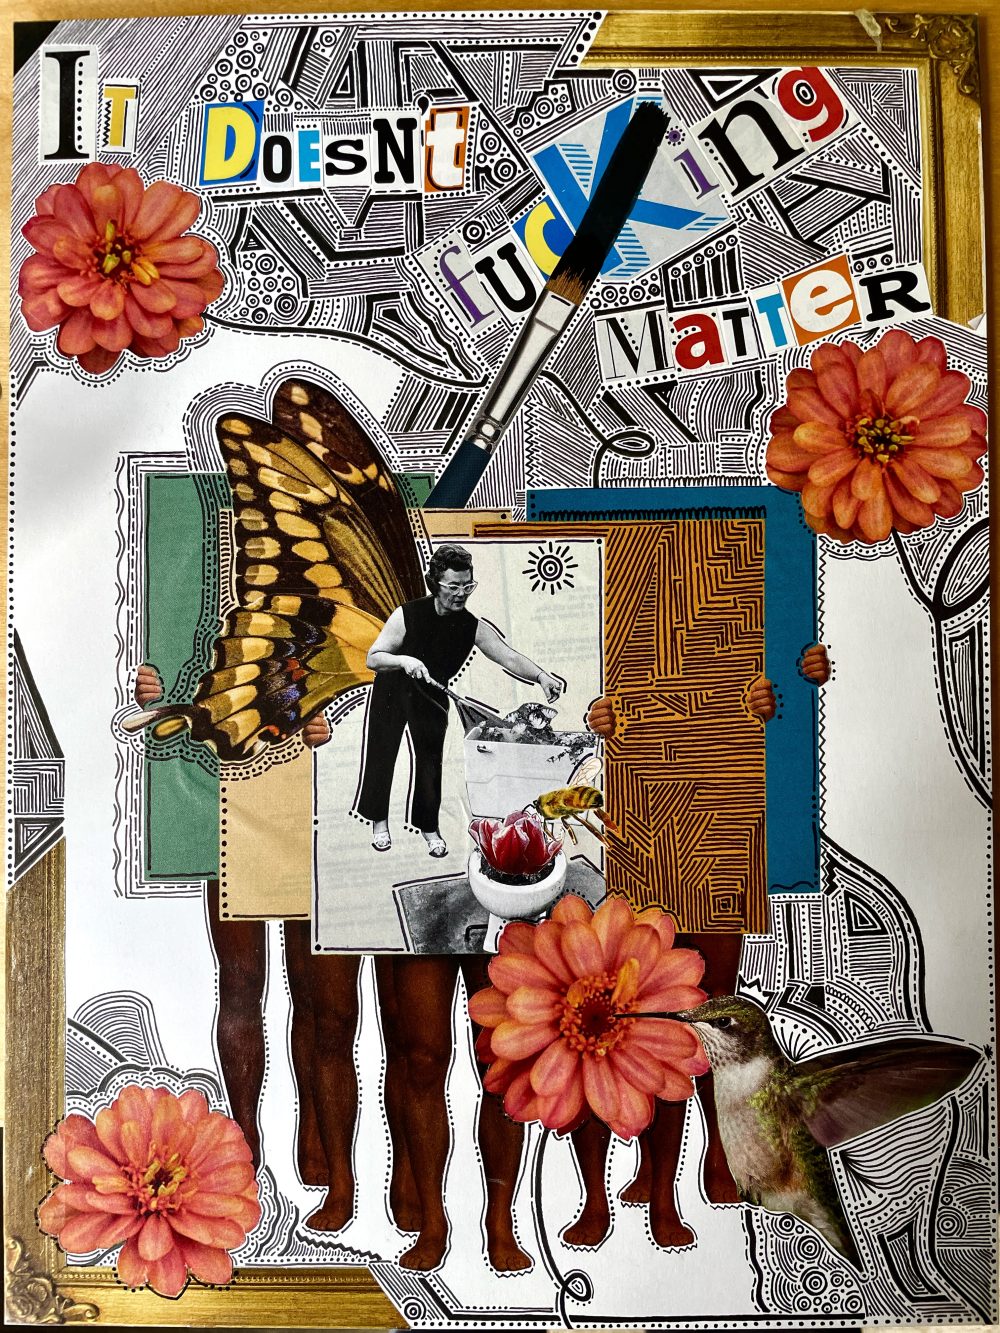 Magazine cut outs of flowers, a hummingbird, a woman watering her outdoor toilet garden, a bumblebee, picture frame corners, and lettering above in various fonts and colors reading, "It Doesn't Fucking Matter". Hand drawn lines and dots bring the pieces together.